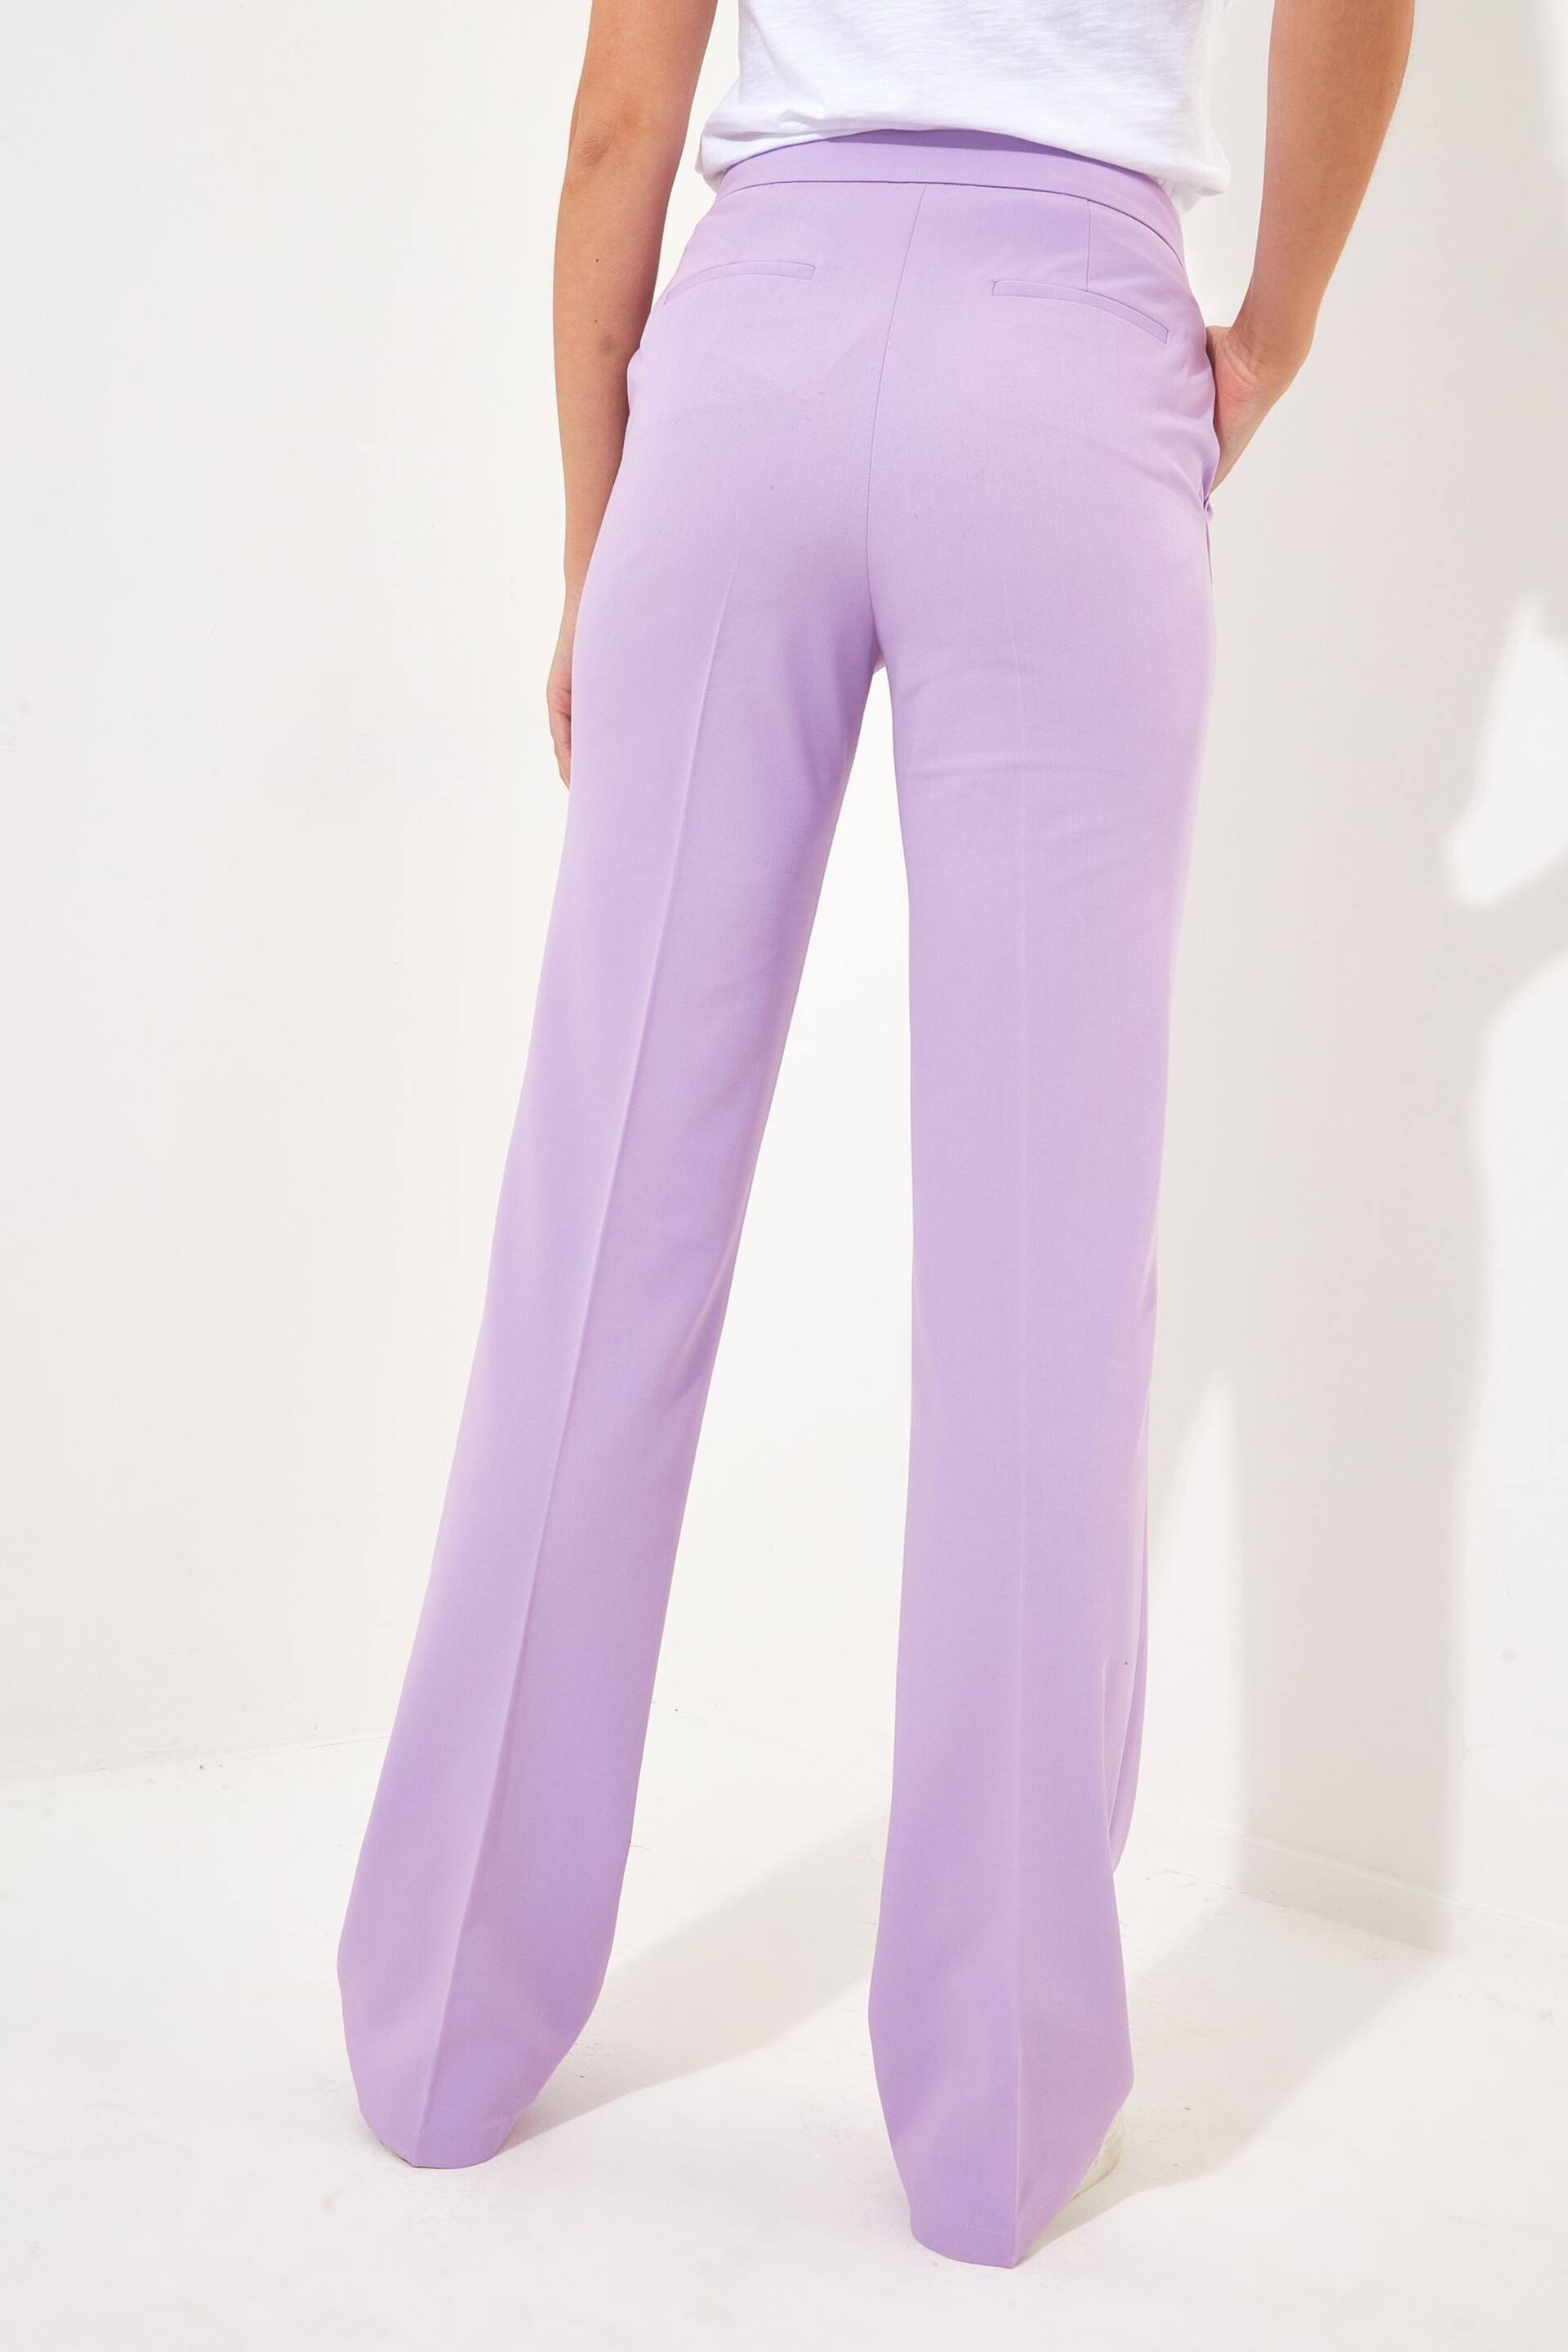 Joe Browns Purple Straight Leg Tailored Co-Ord Trousers - Image 3 of 6